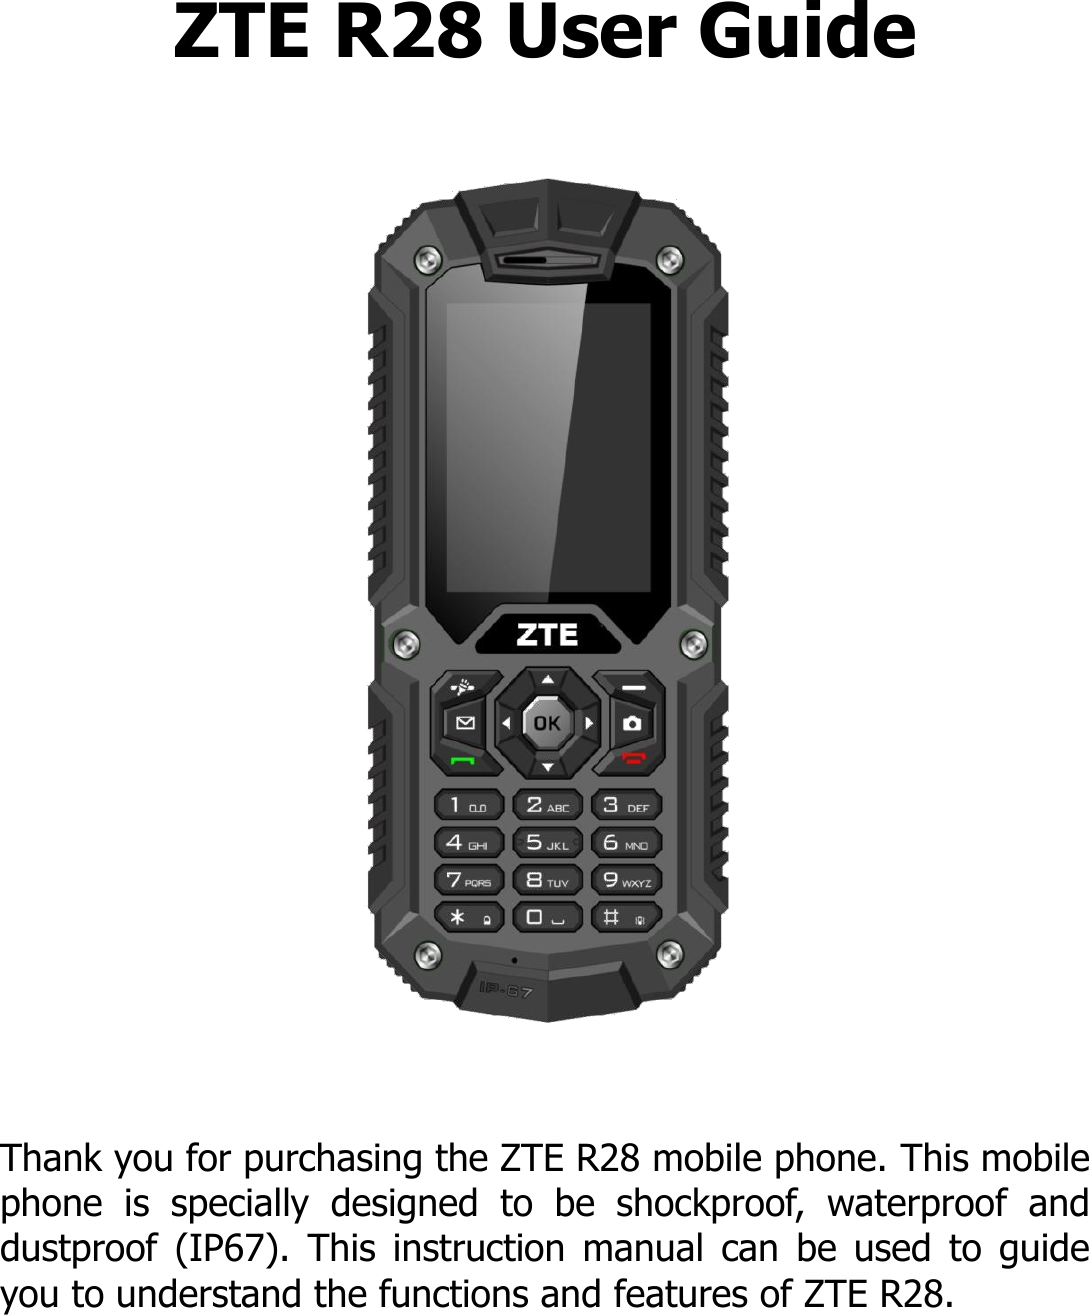 ZTE R28 User Guide      Thank you for purchasing the ZTE R28 mobile phone. This mobile phone  is  specially  designed  to  be  shockproof,  waterproof  and dustproof  (IP67).  This  instruction  manual  can  be  used  to  guide you to understand the functions and features of ZTE R28.    